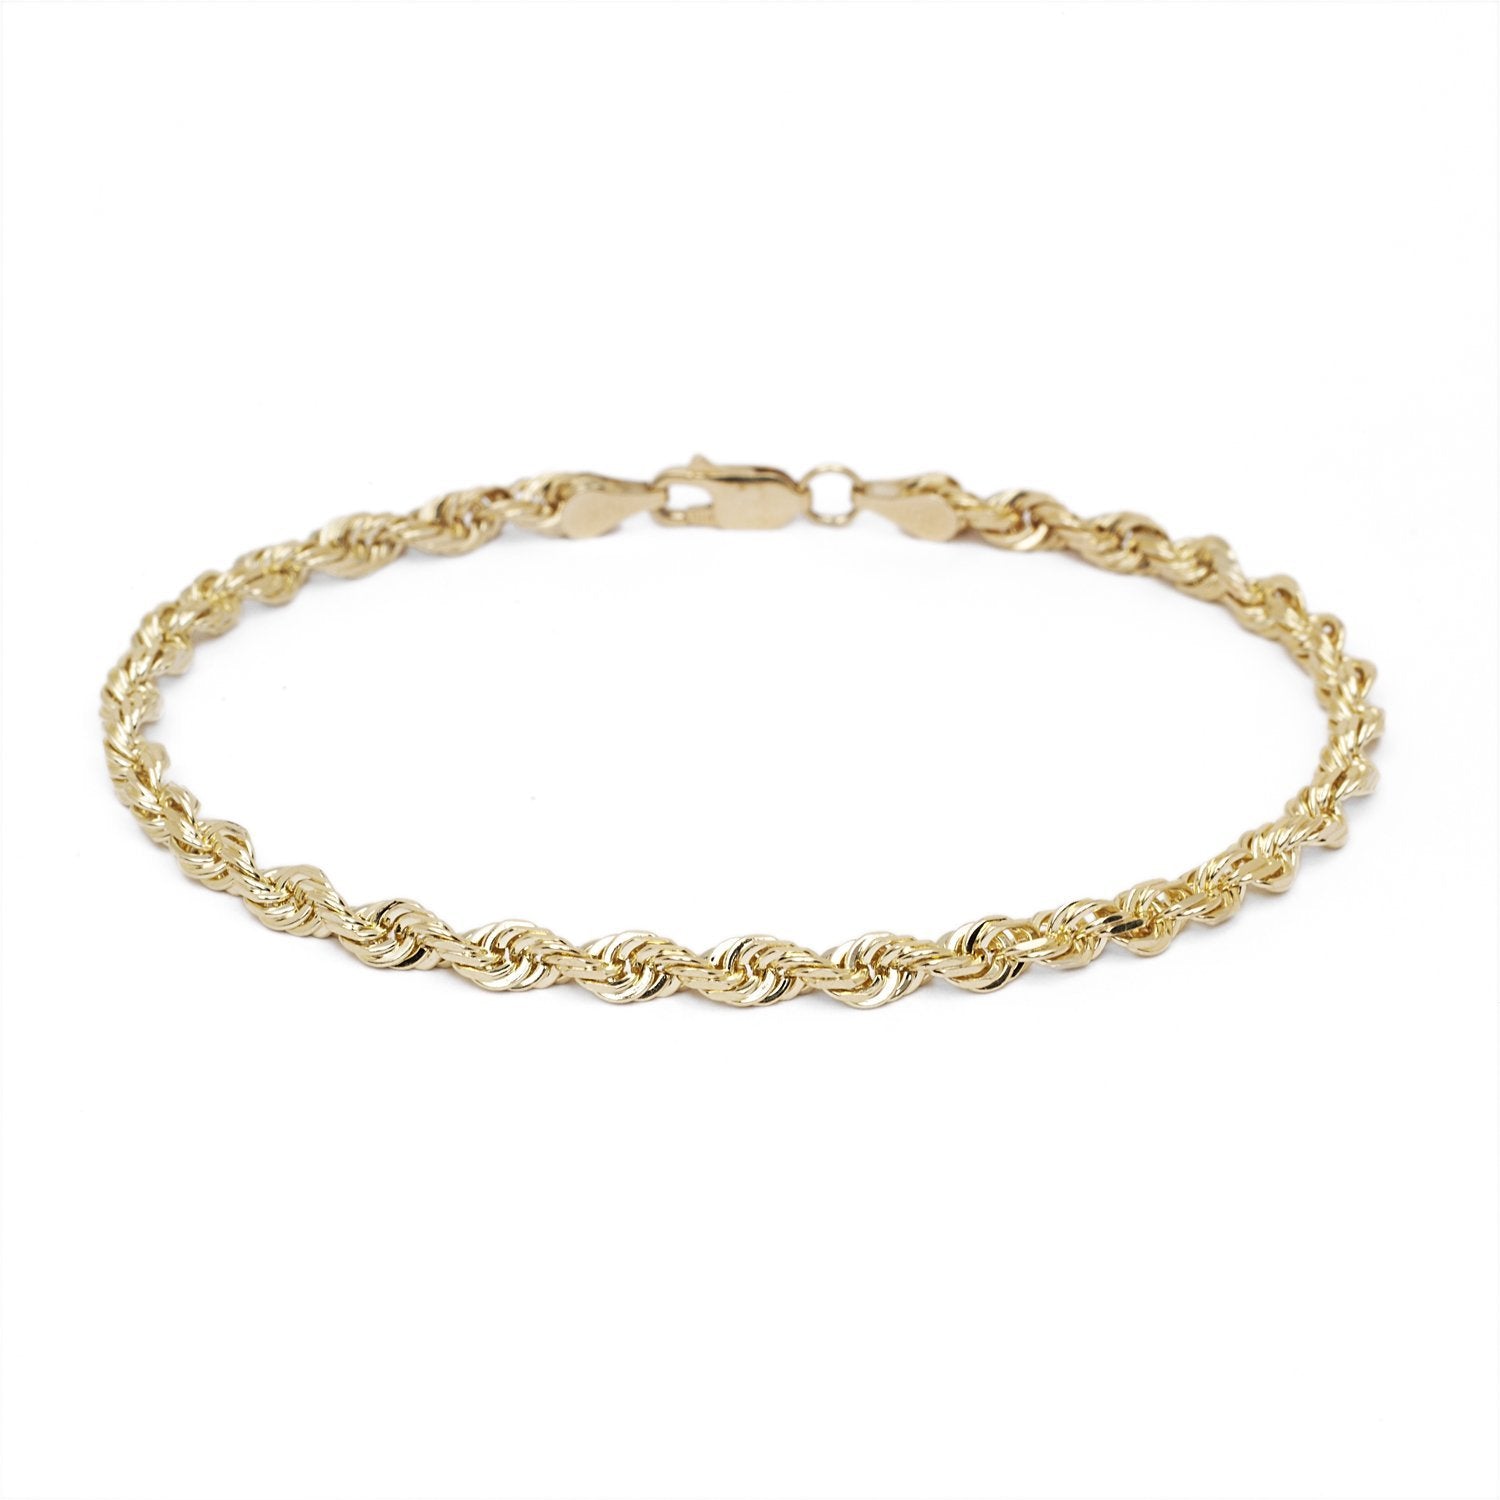 10k Yellow Gold Diamond Cut Hollow Rope Chain Bracelet and Anklet for Men & Women, 6mm